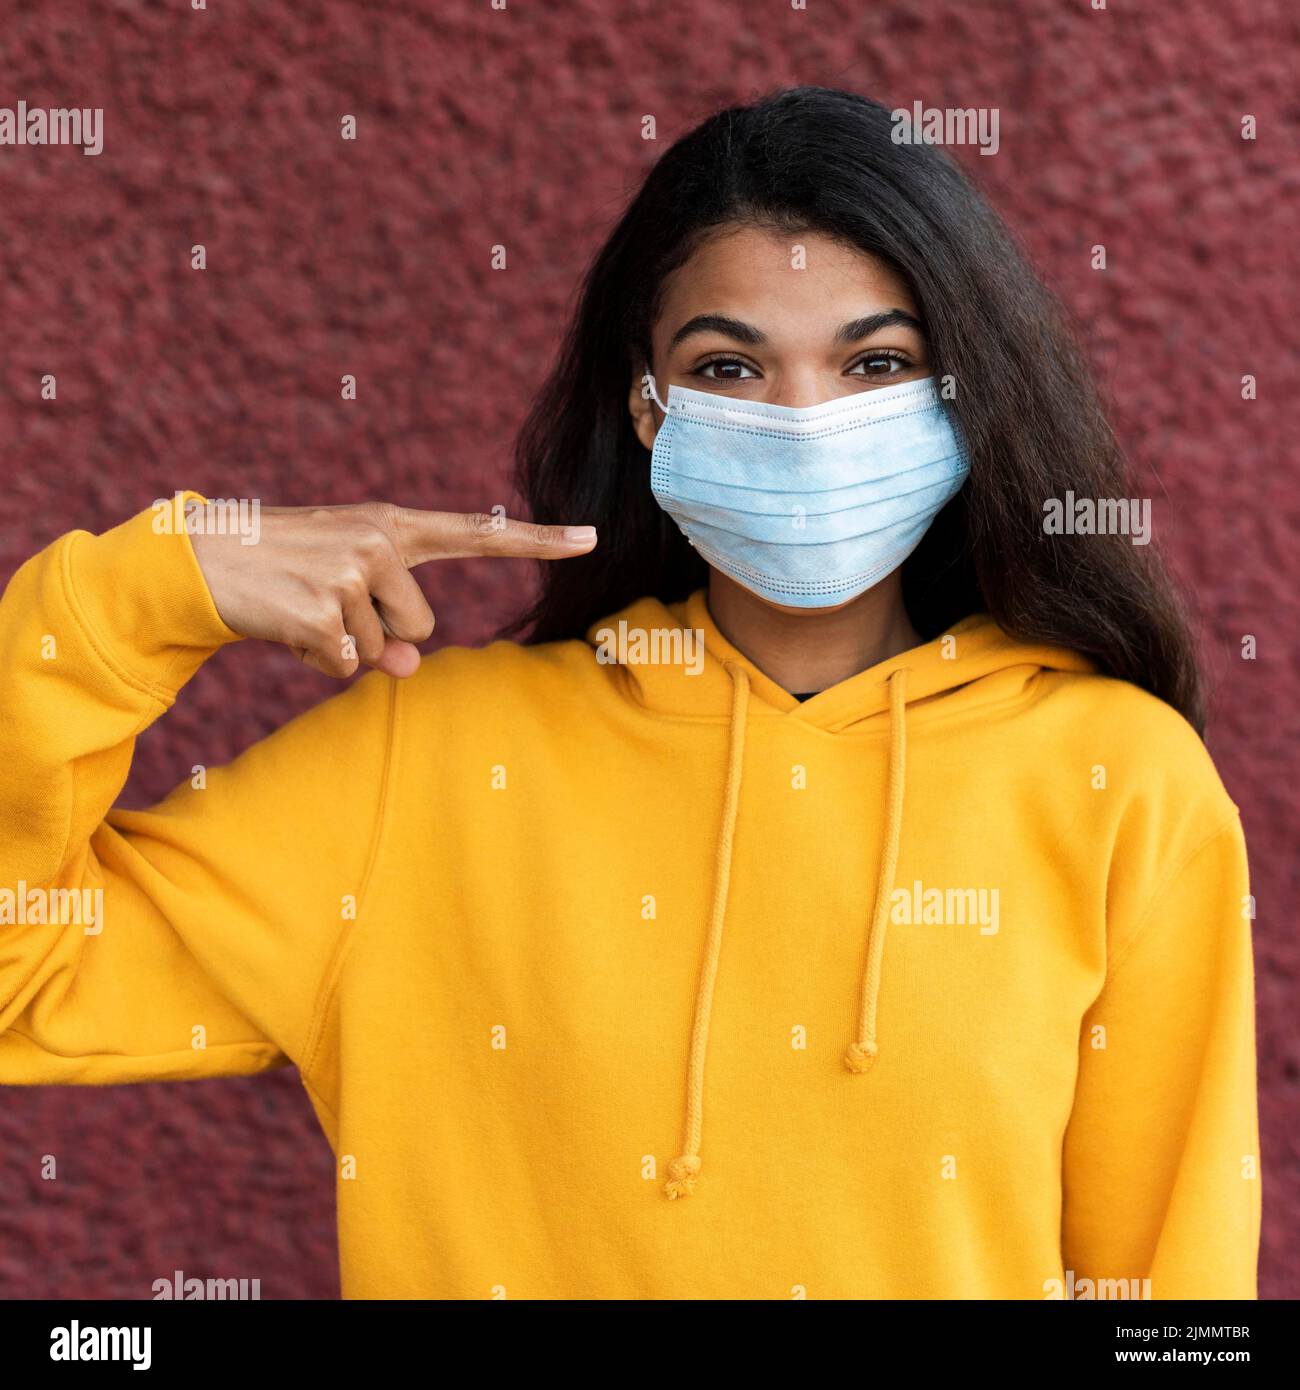 African american woman wearing medical mask Stock Photo